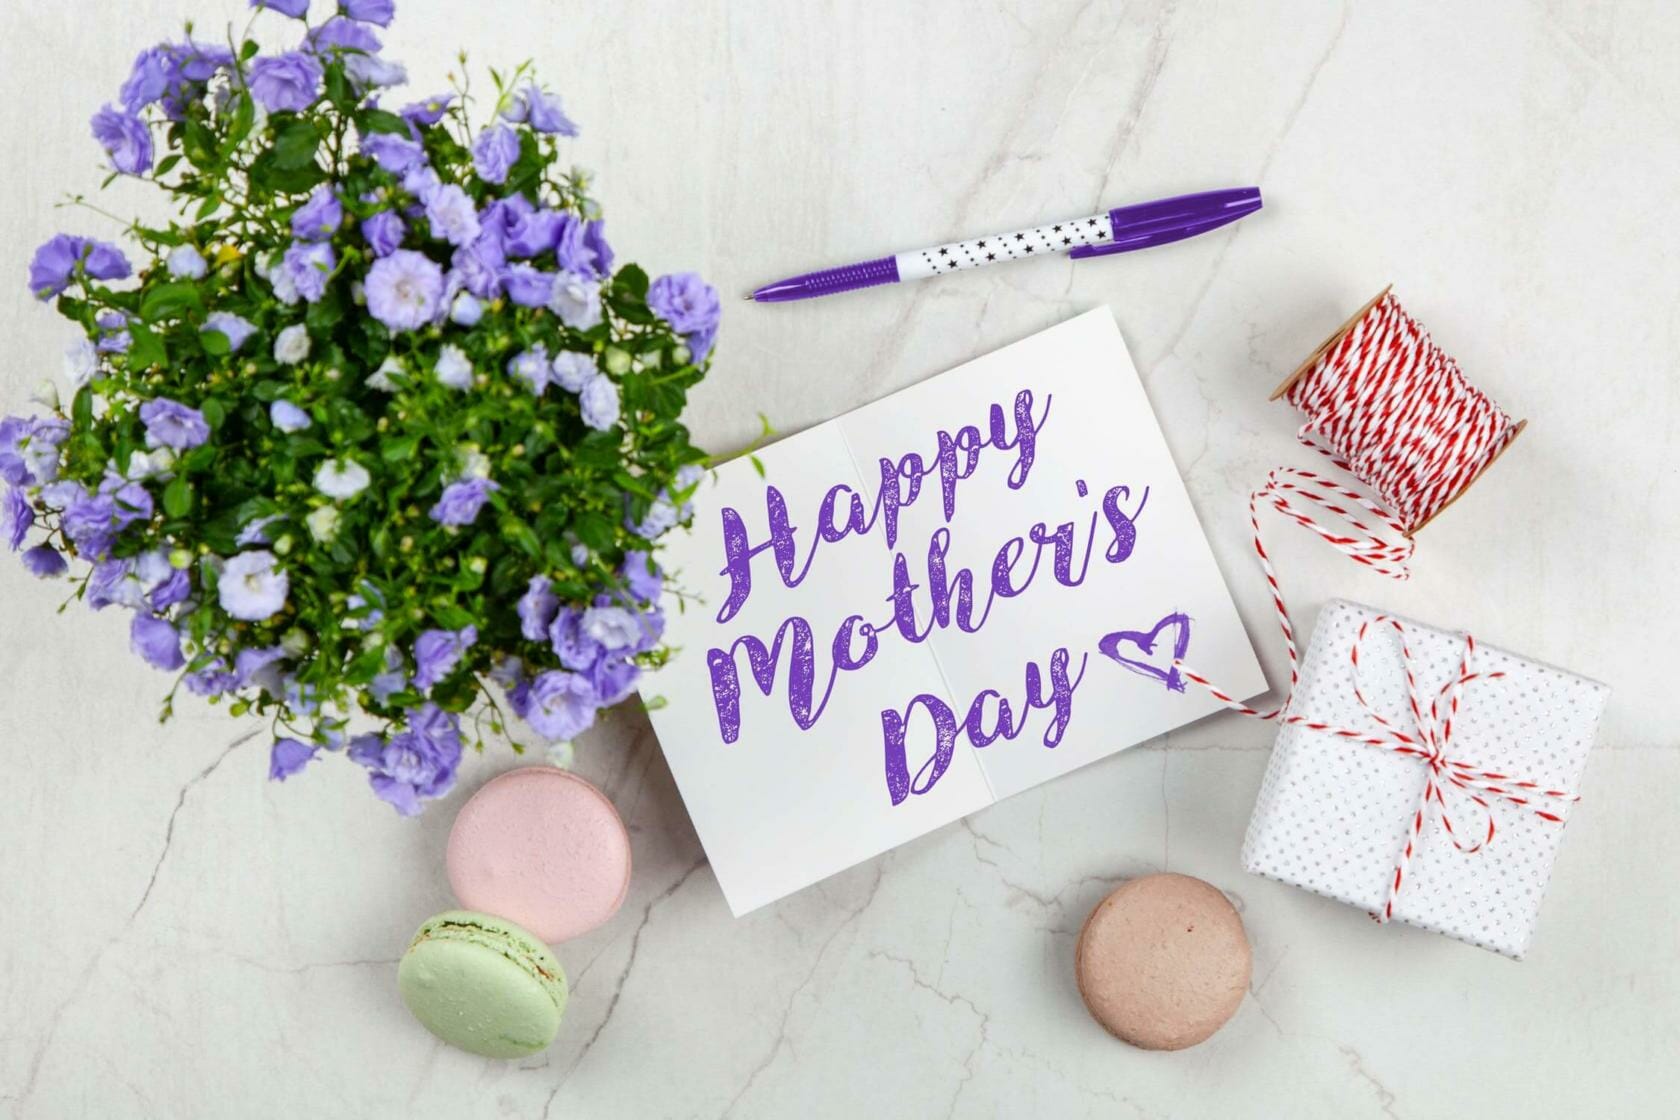 Happy Mother's Day card with flowers and presents